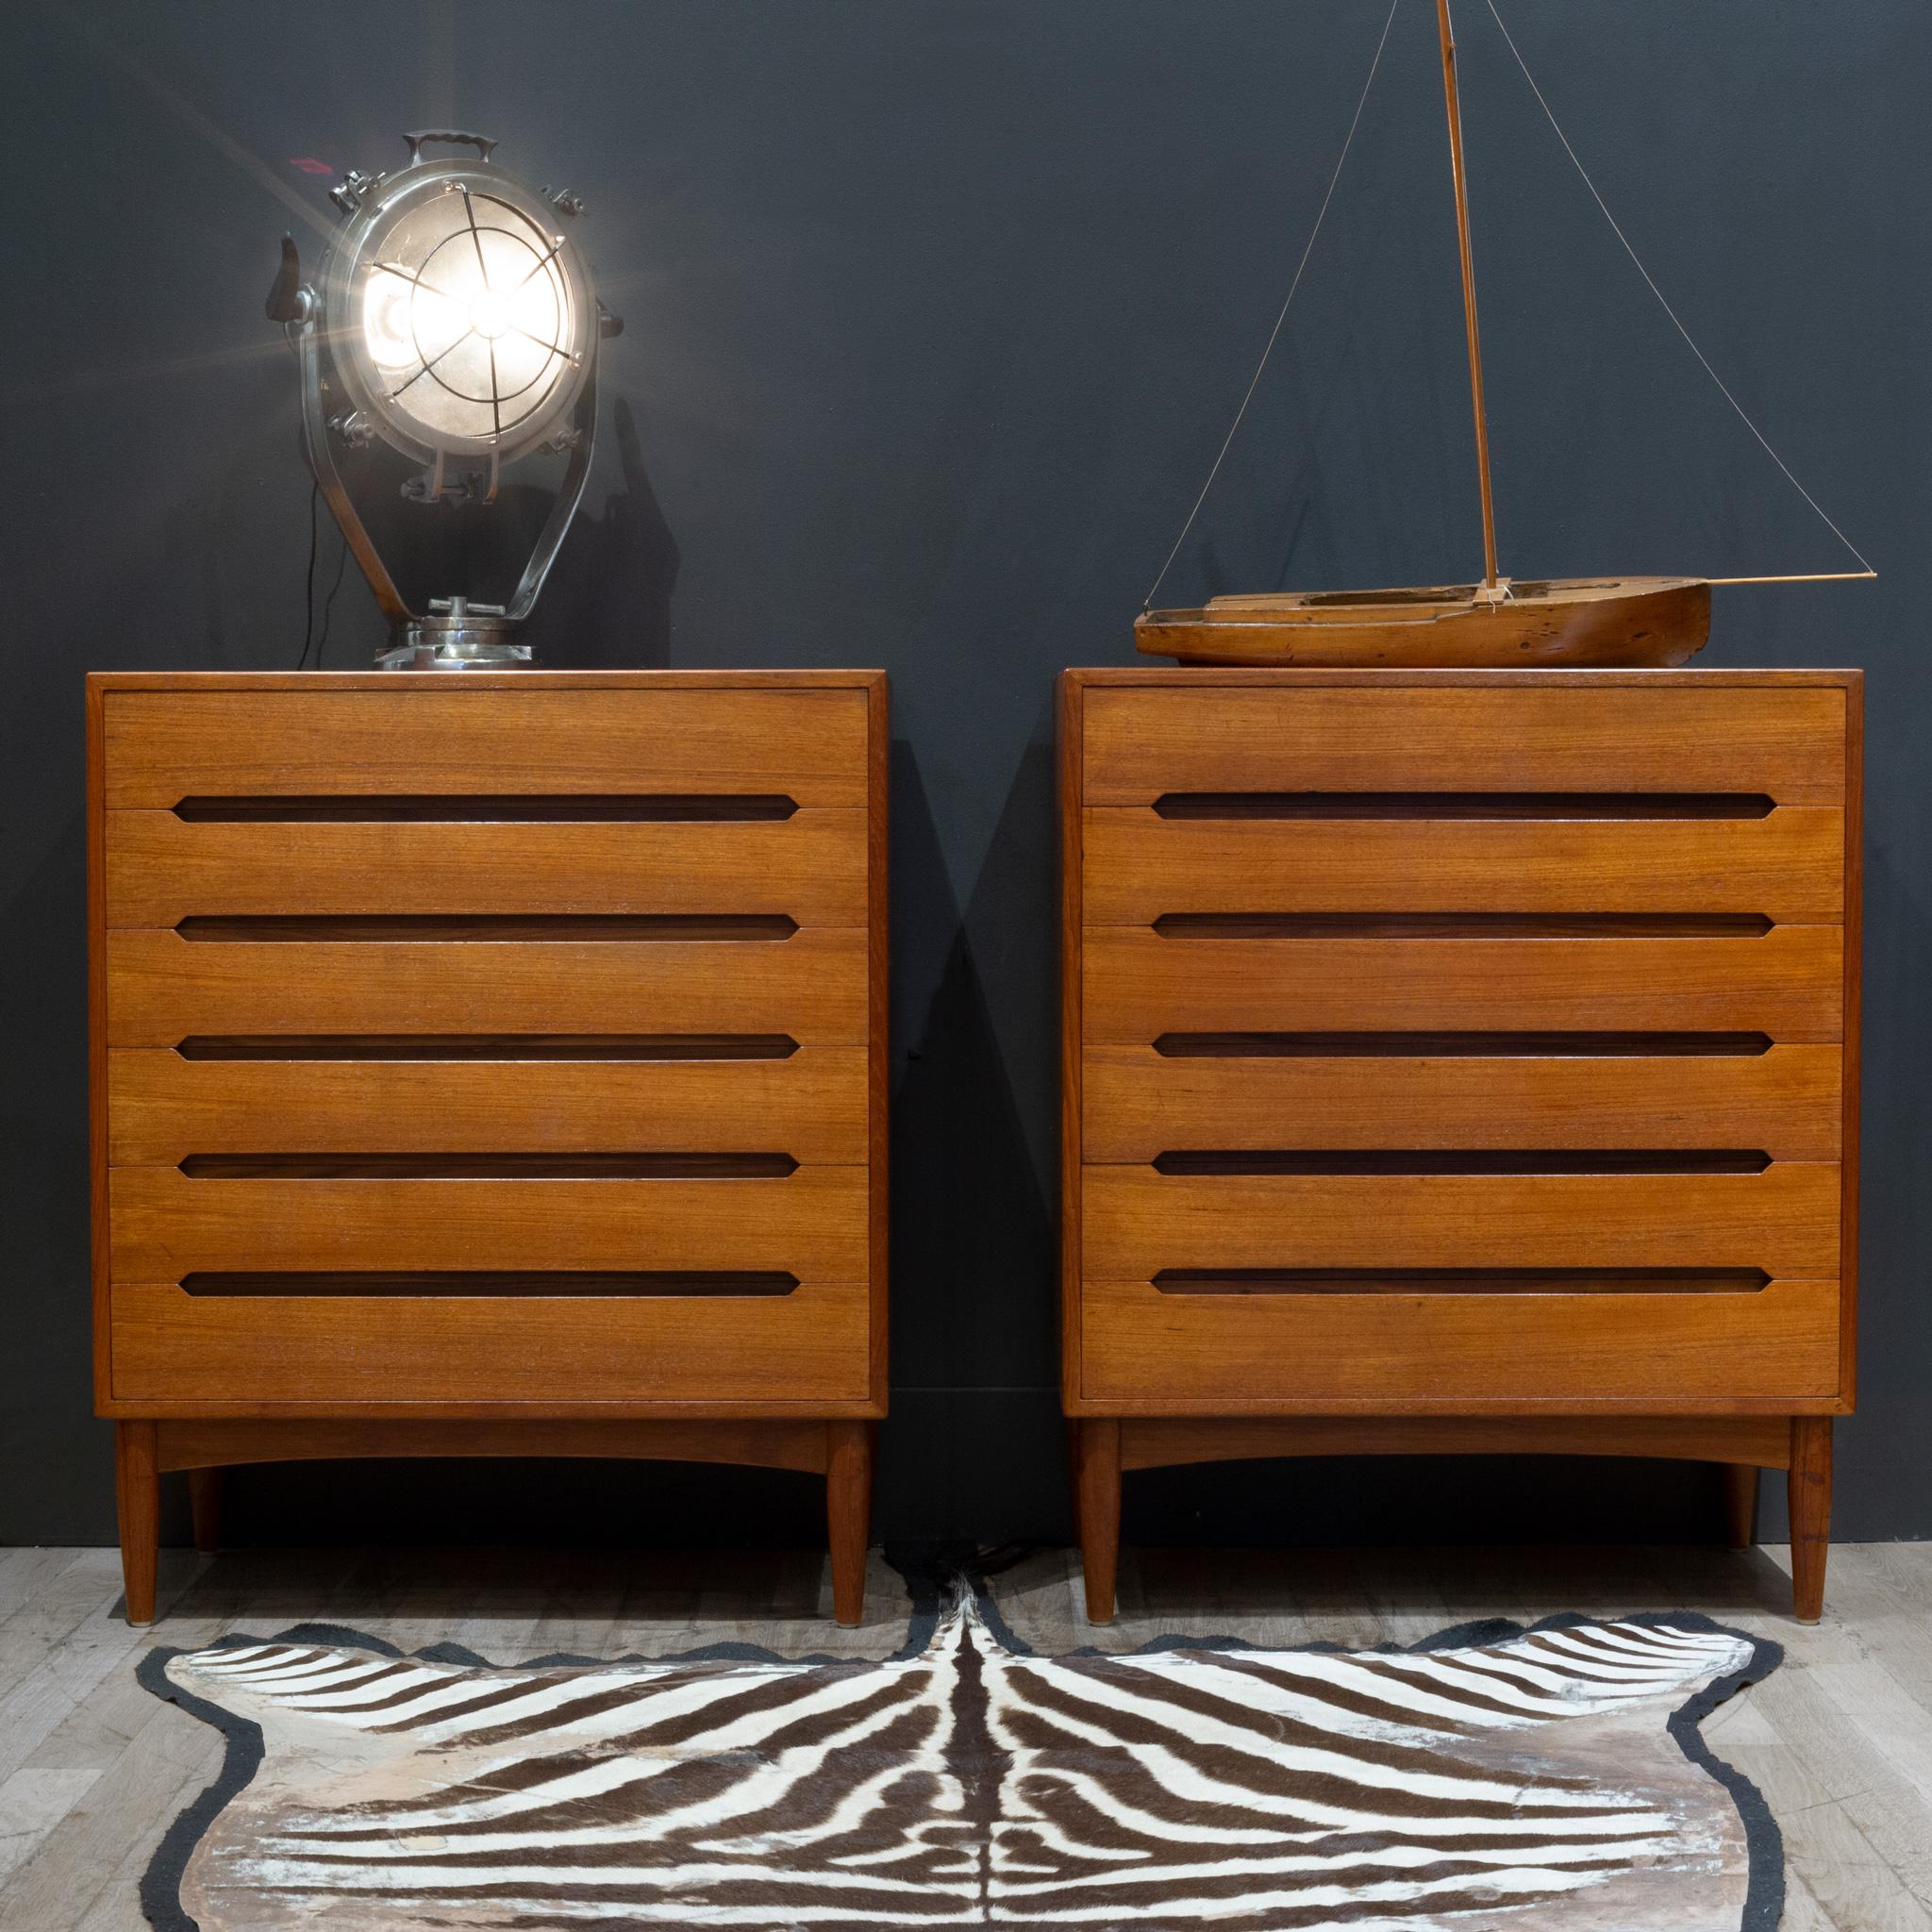 ABOUT

Price per piece.

A pair of mid-century modern dressers designed and manufactured by E.W. Bach in Denmark, circa 1950s featuring six drawers with dovetailed joinery and carved pulls showcasing impeccable craftsmanship. The sturdy dressers sit